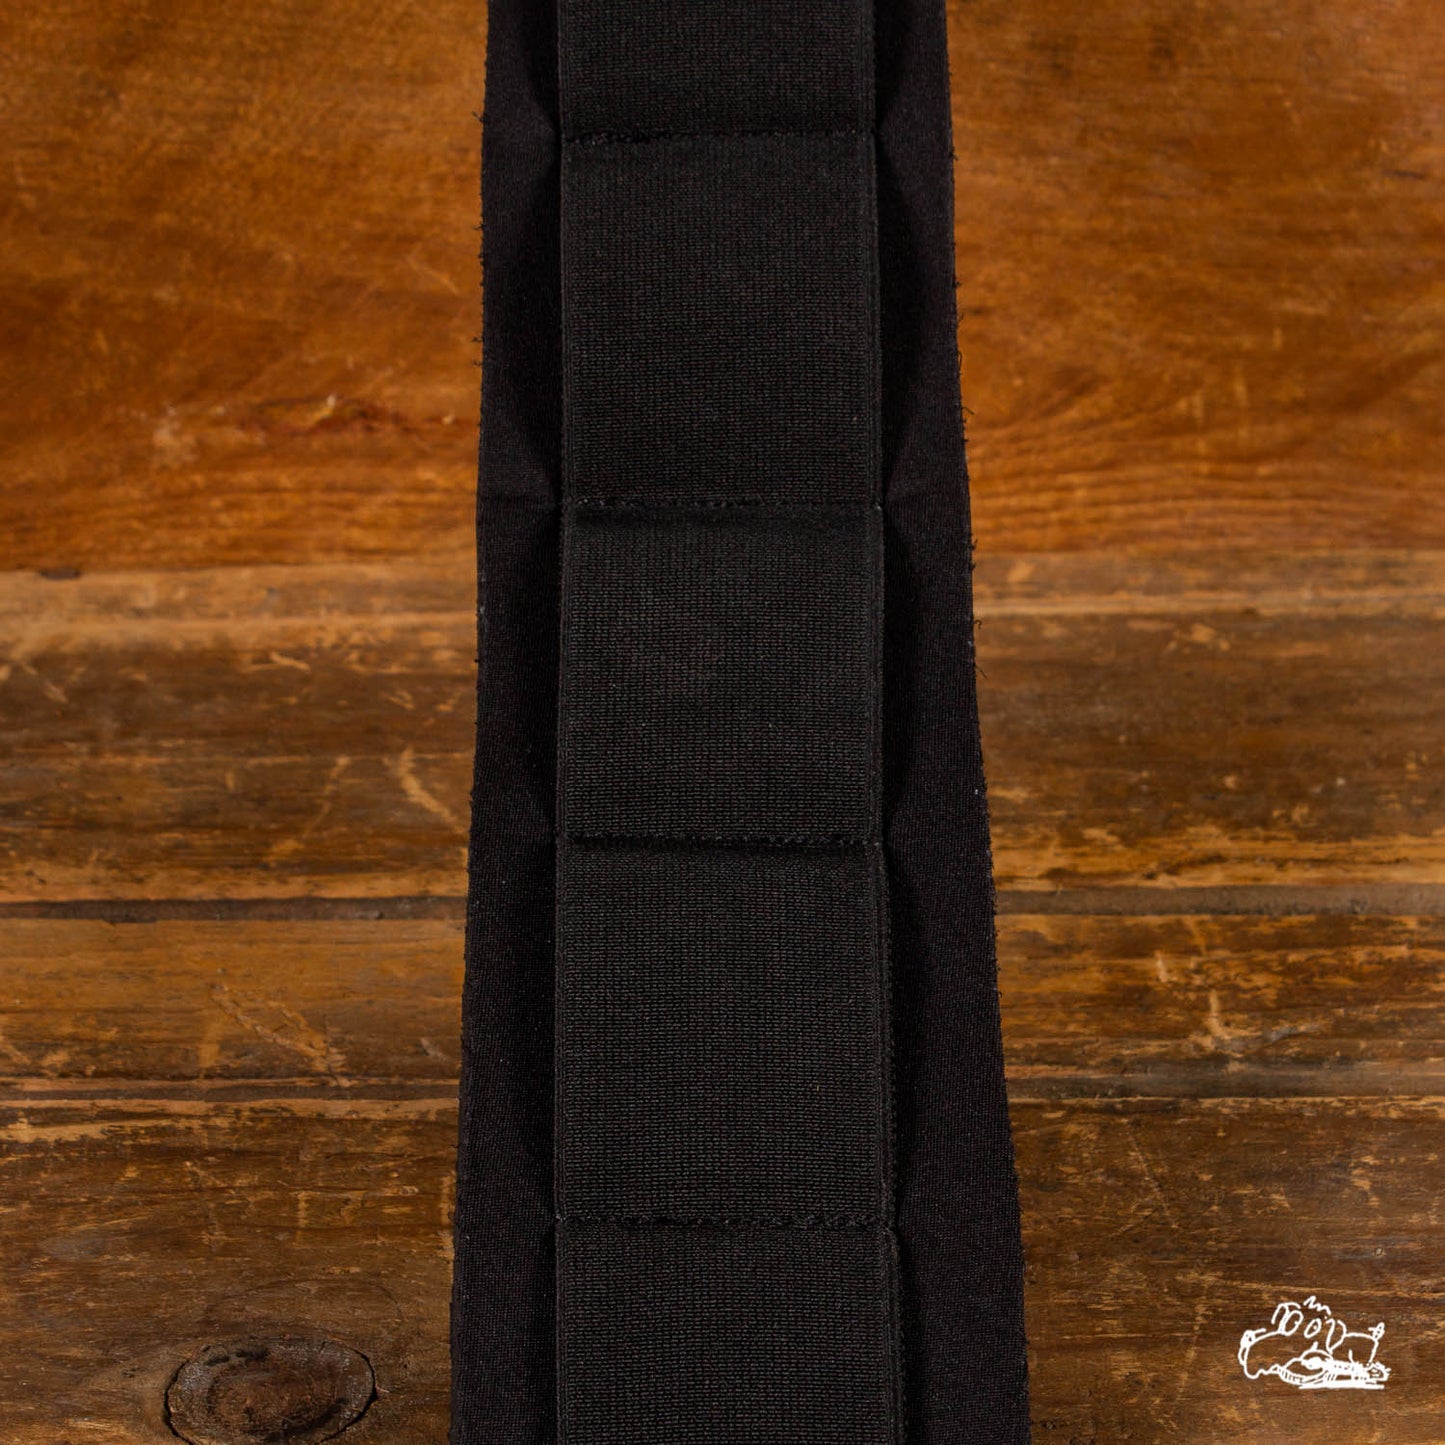 Neo Strap - Padded Guitar Strap by Cool Music Inc.